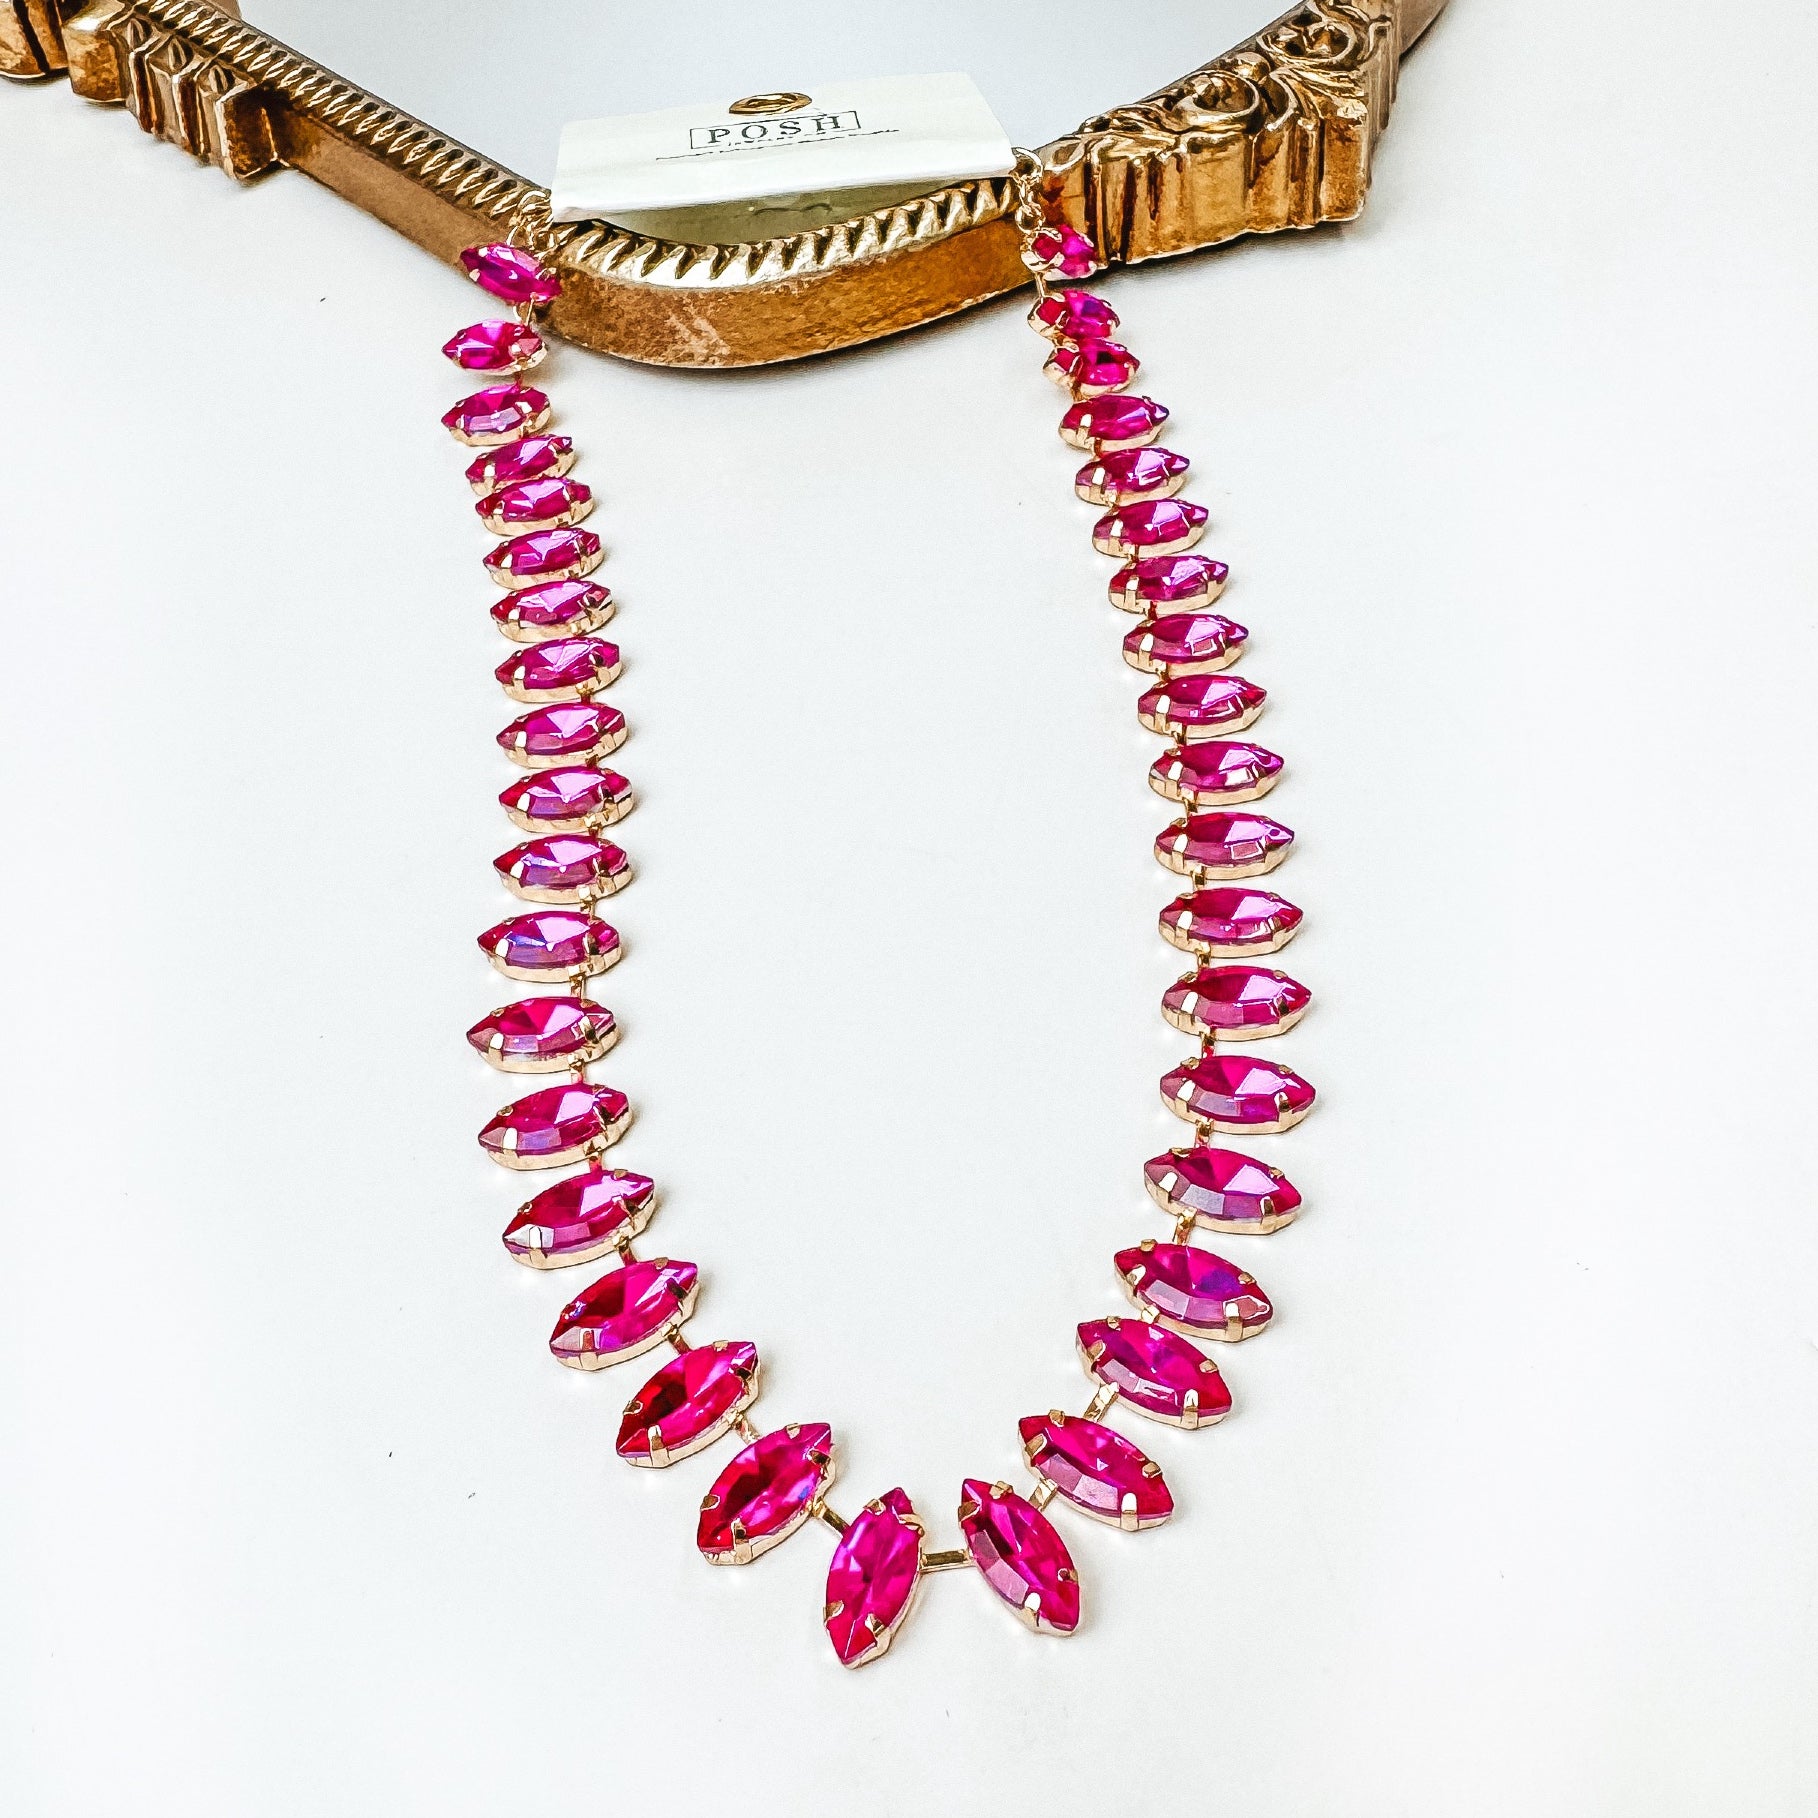 Pink Panache | Marquis Rhinestone Necklace in Fuchsia Pink - Giddy Up Glamour Boutique